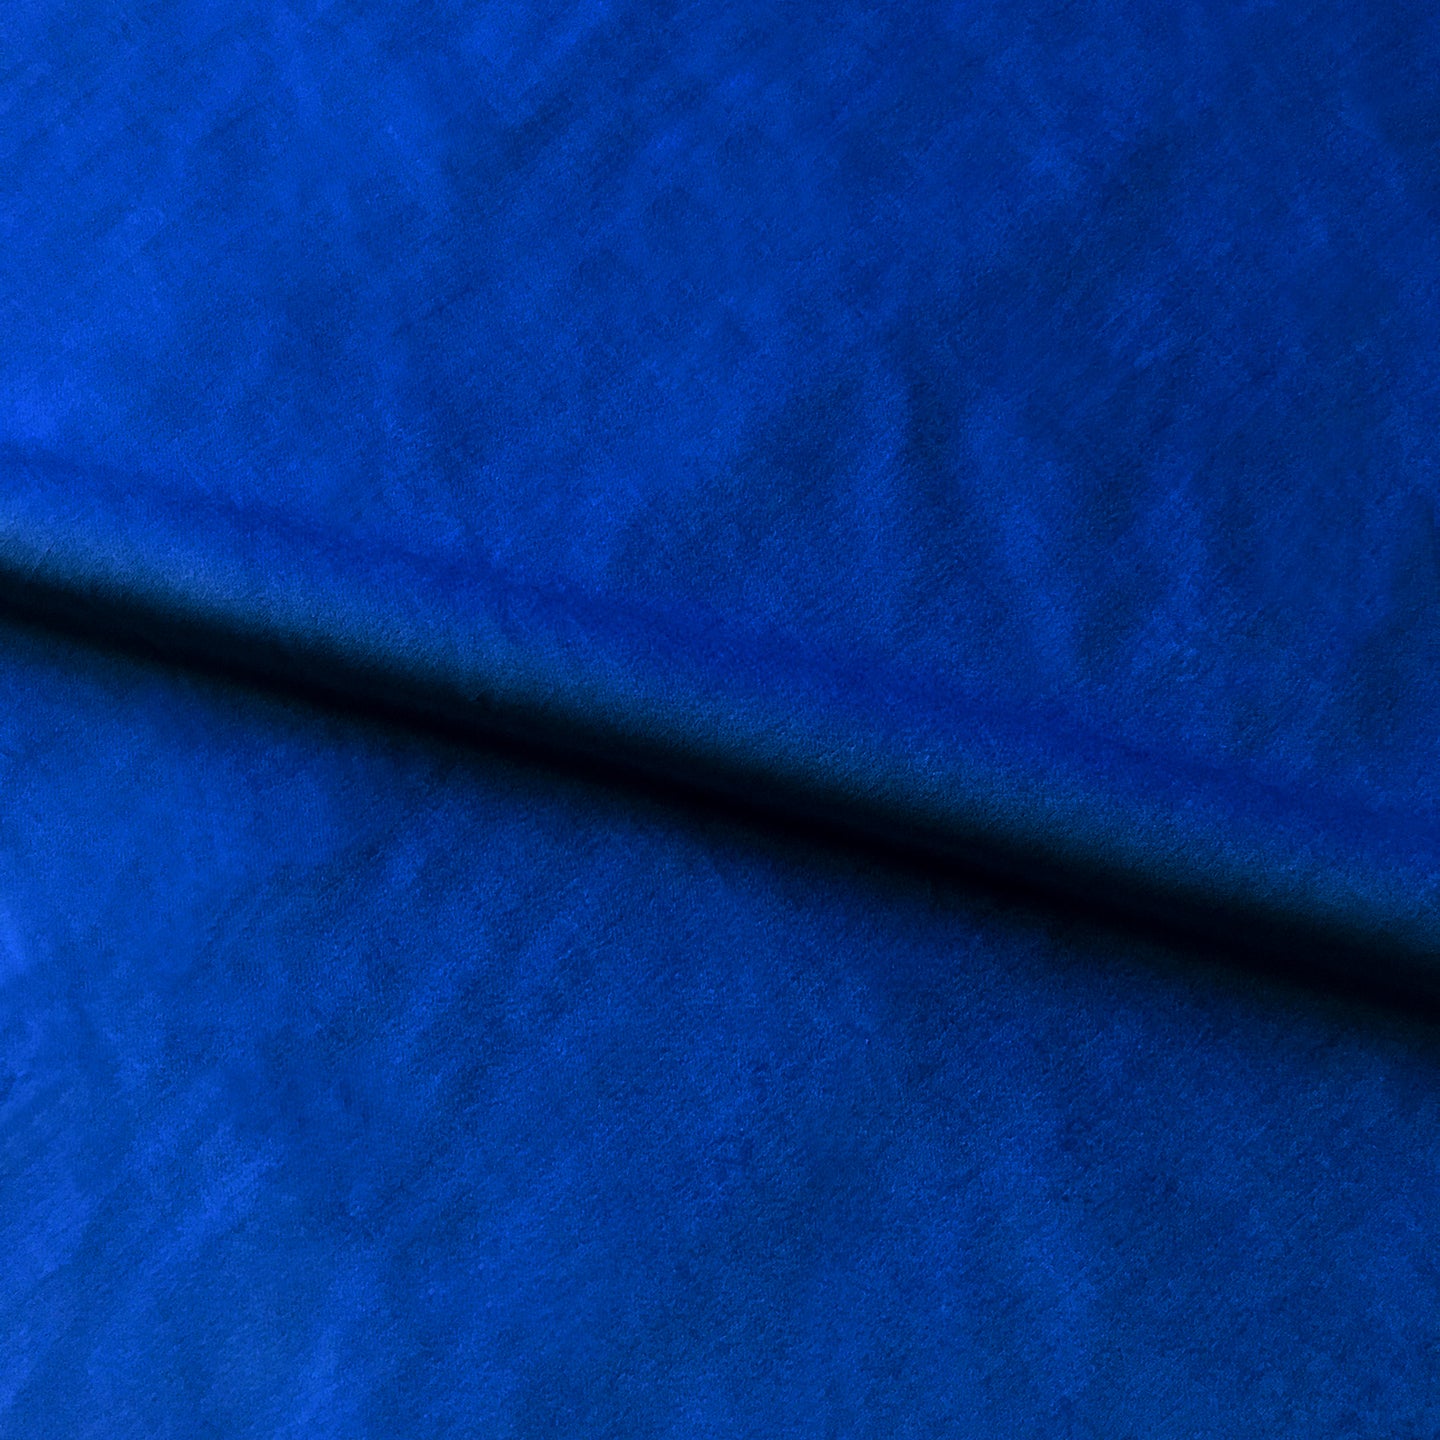 Blue, Solid Plain Upholstery Velvet Fabric By The Yard